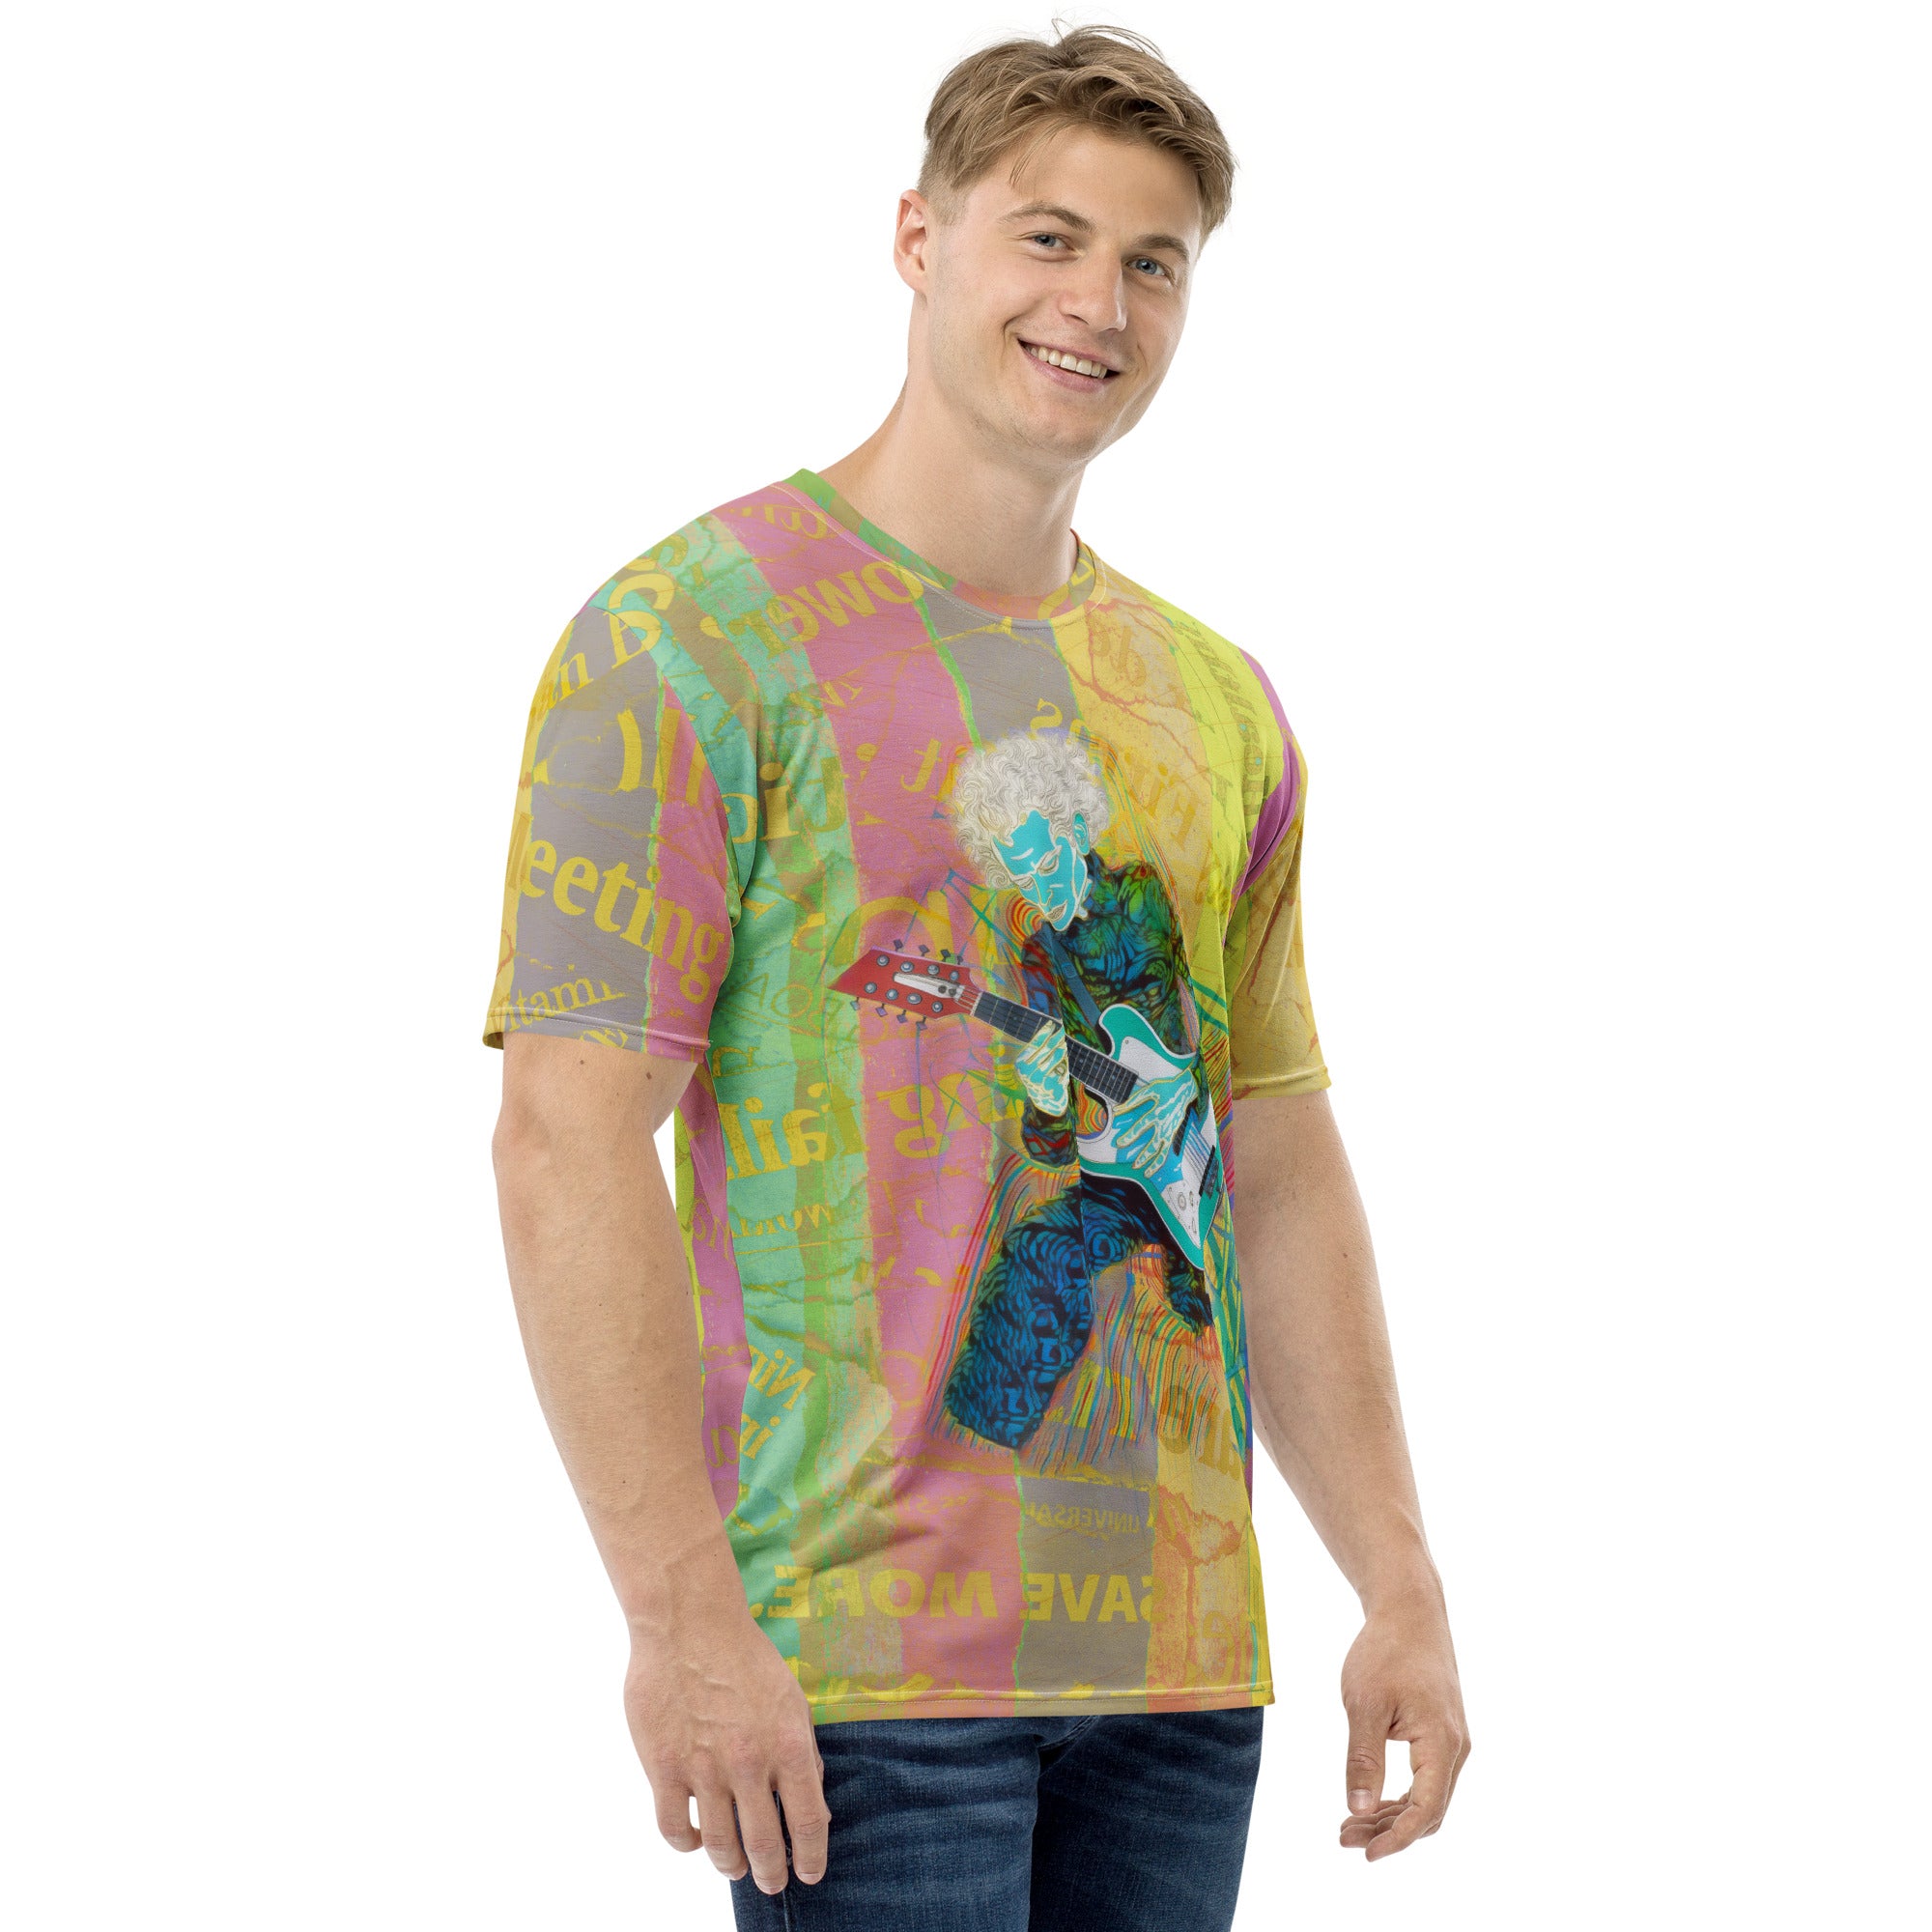 Psychedelic splash pattern on men's crew neck t-shirt with bright colors.